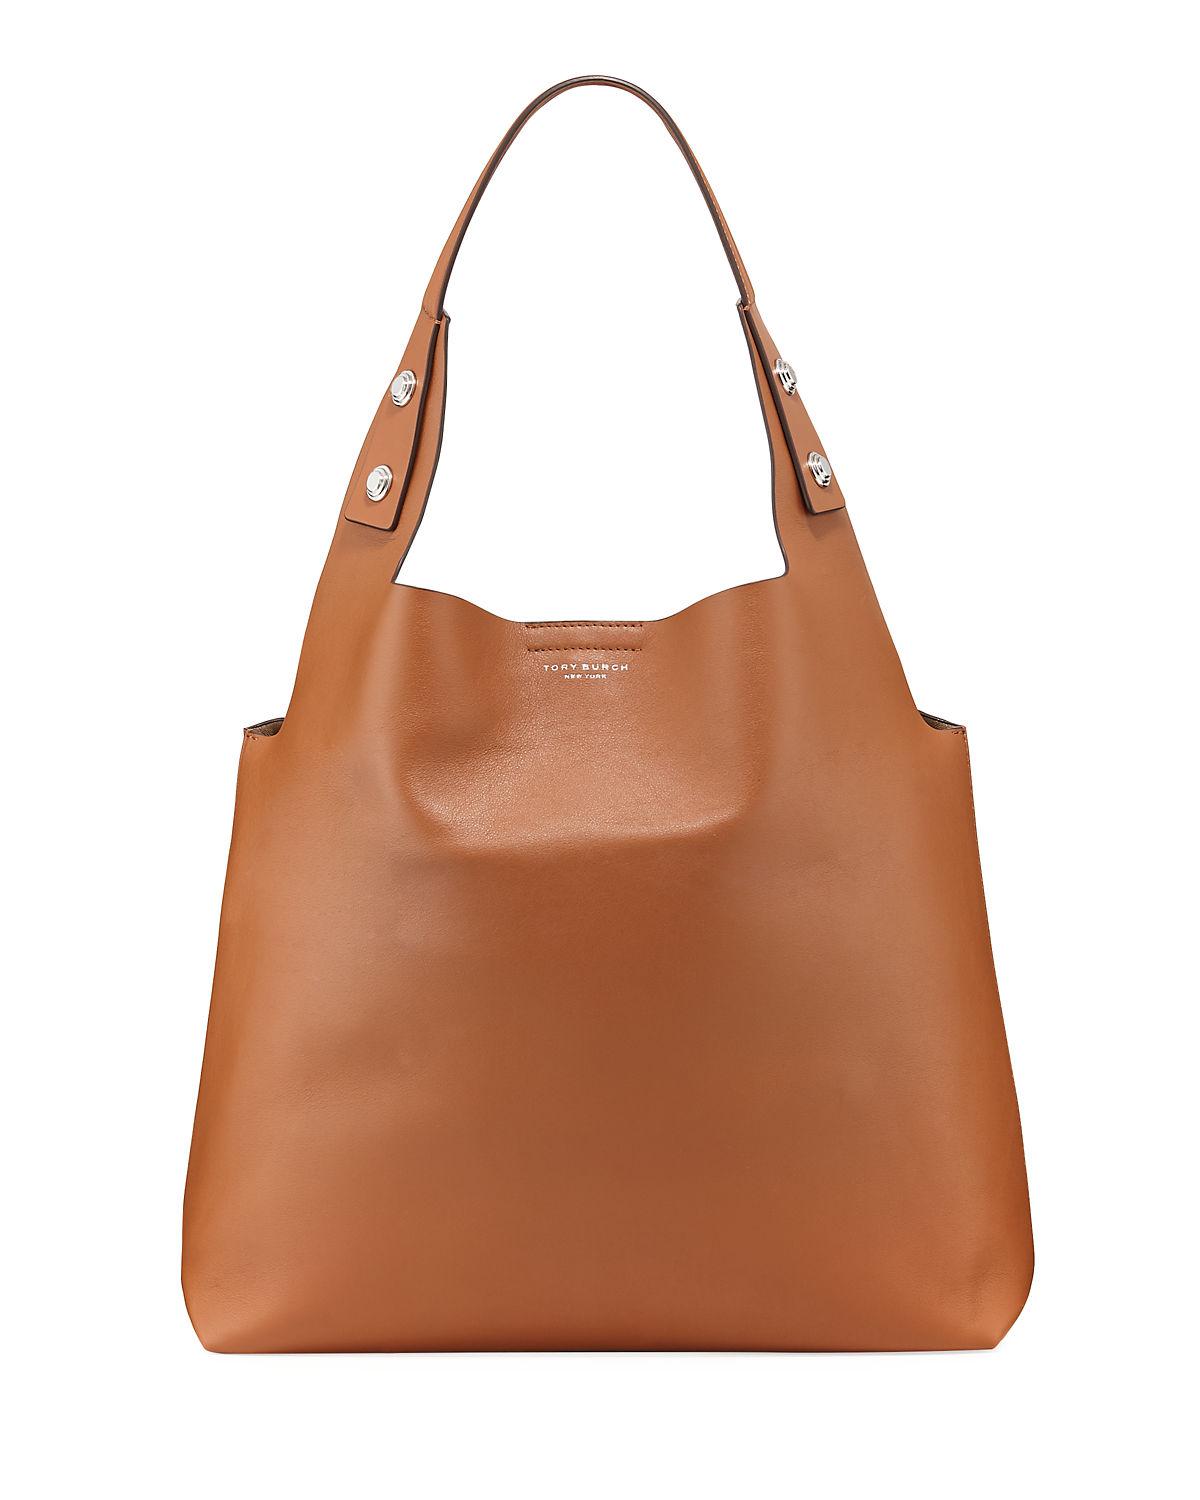 Tory Burch Rory Smooth Leather Tote Bag in Light Brown (Brown) - Lyst